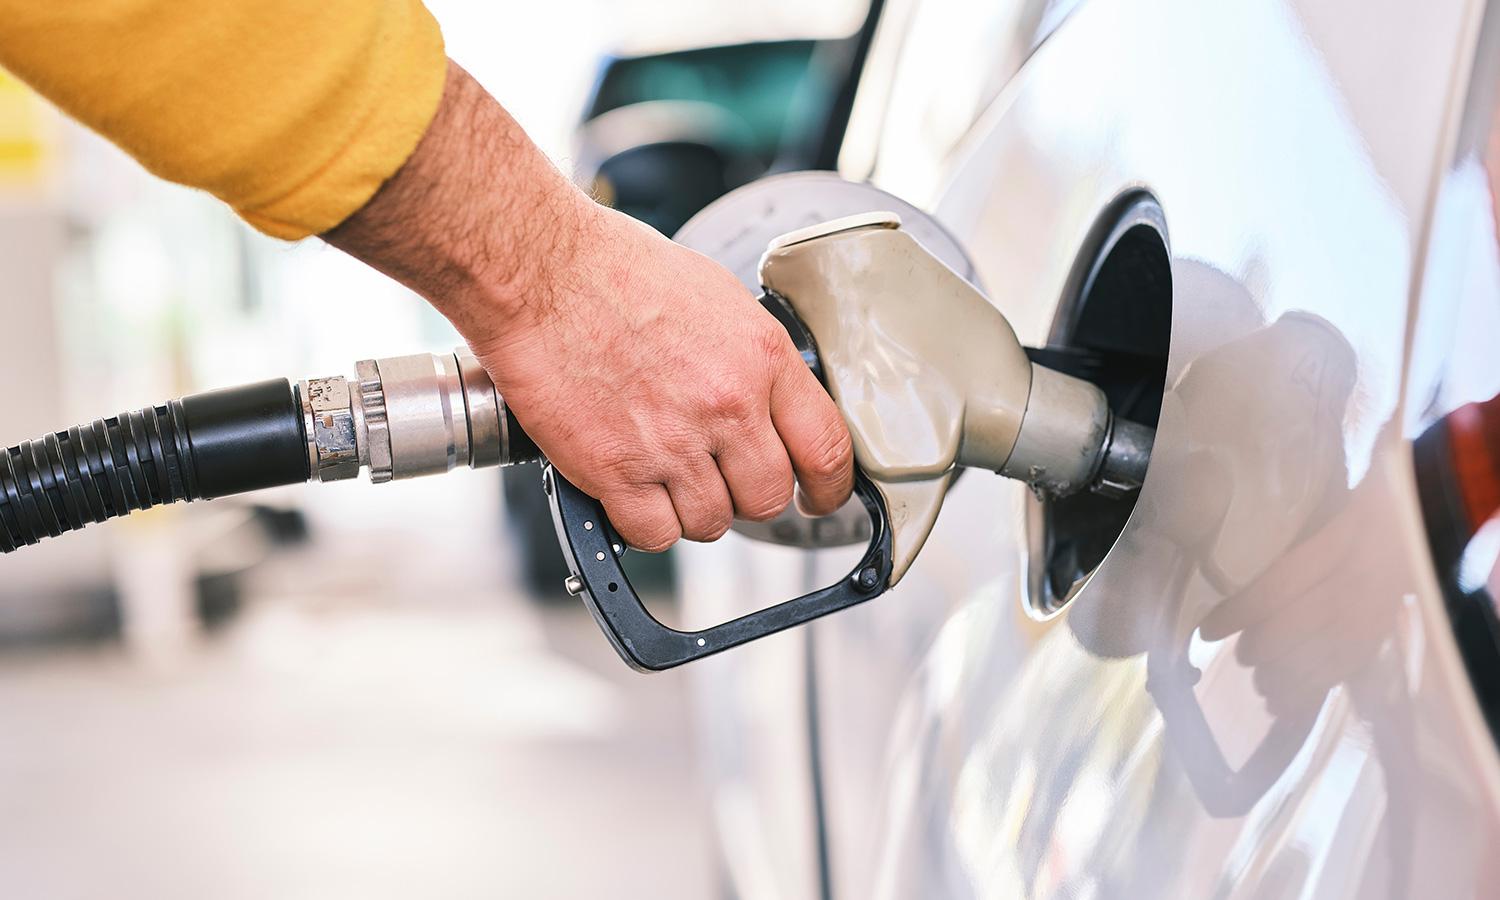 How to Maximize Your Vehicle's Fuel Economy